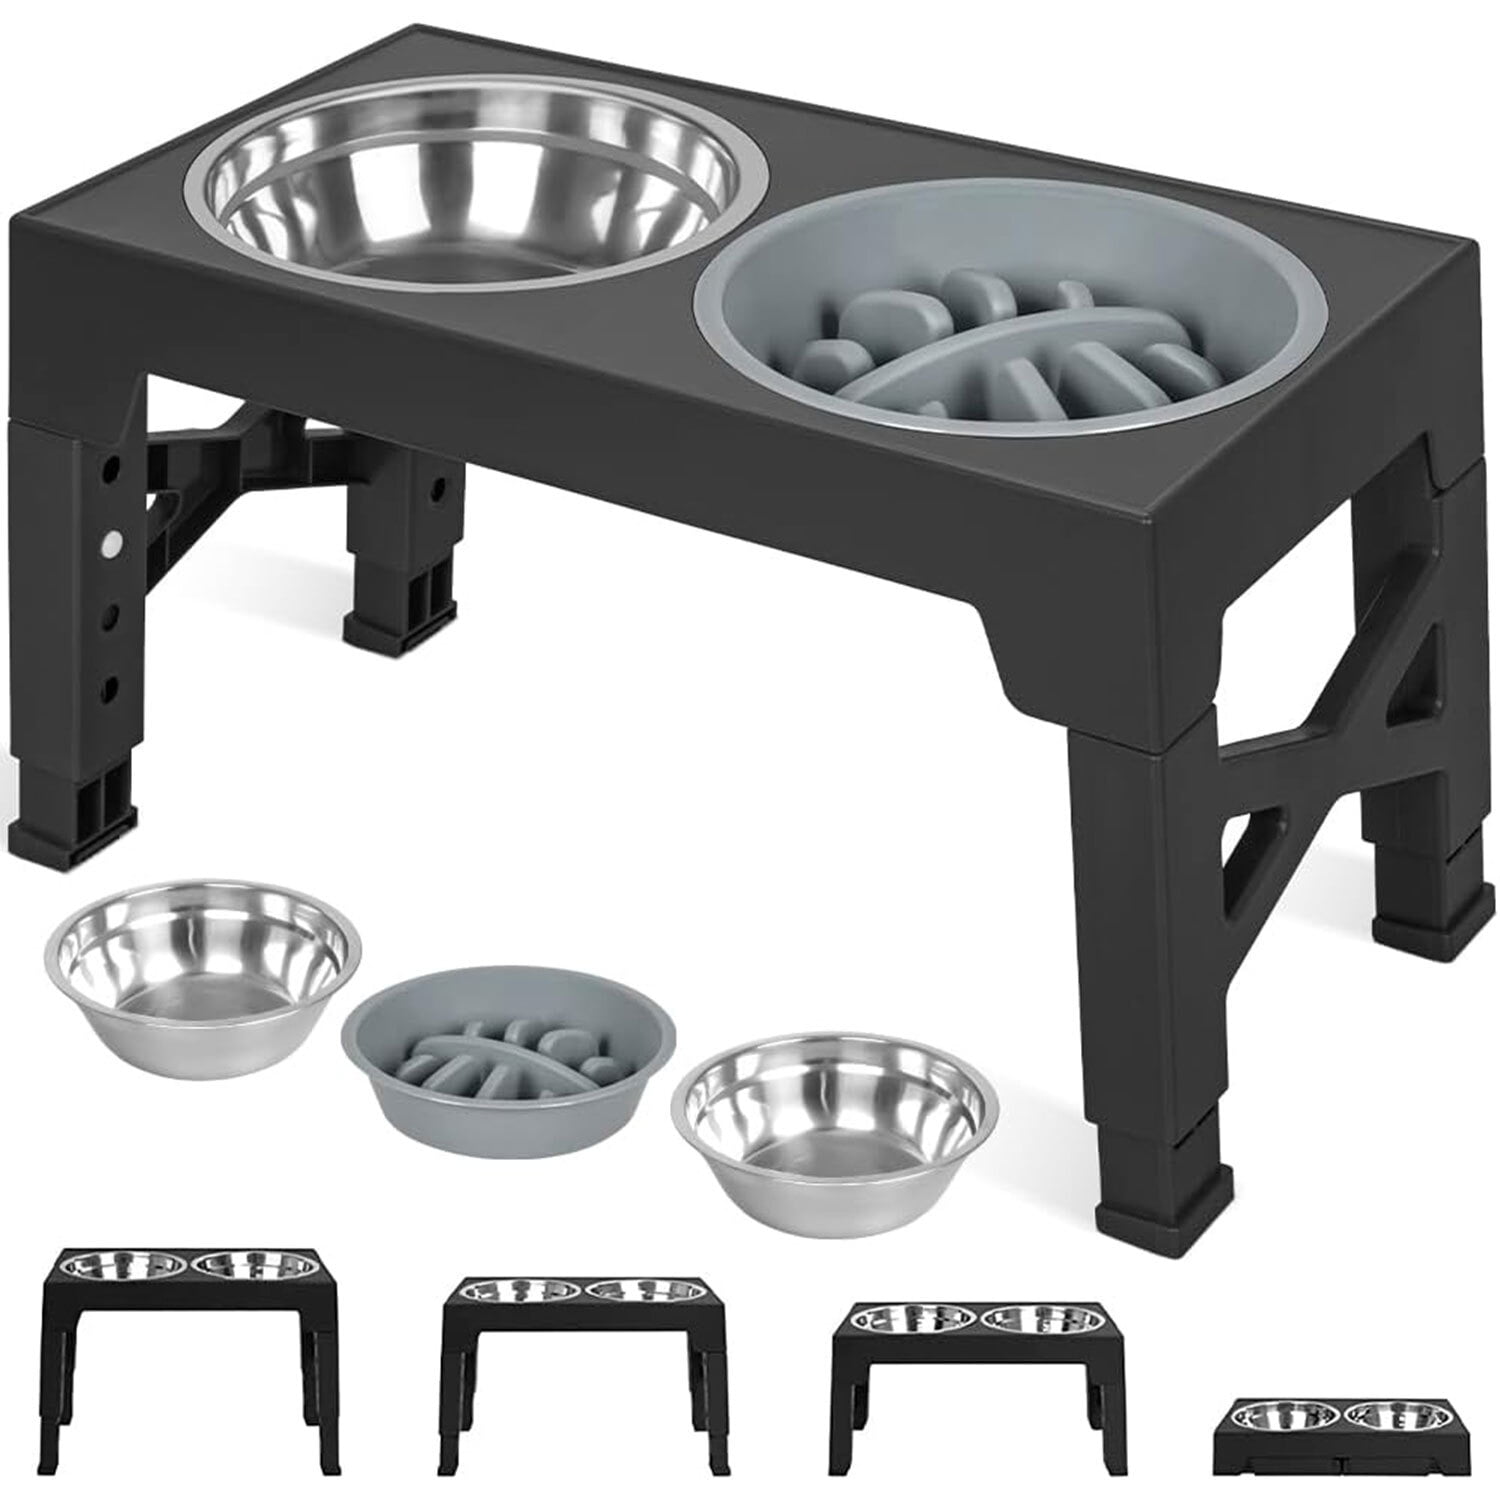 Adjustable Elevated  Elevated Dog Bowls With Slow Feeder